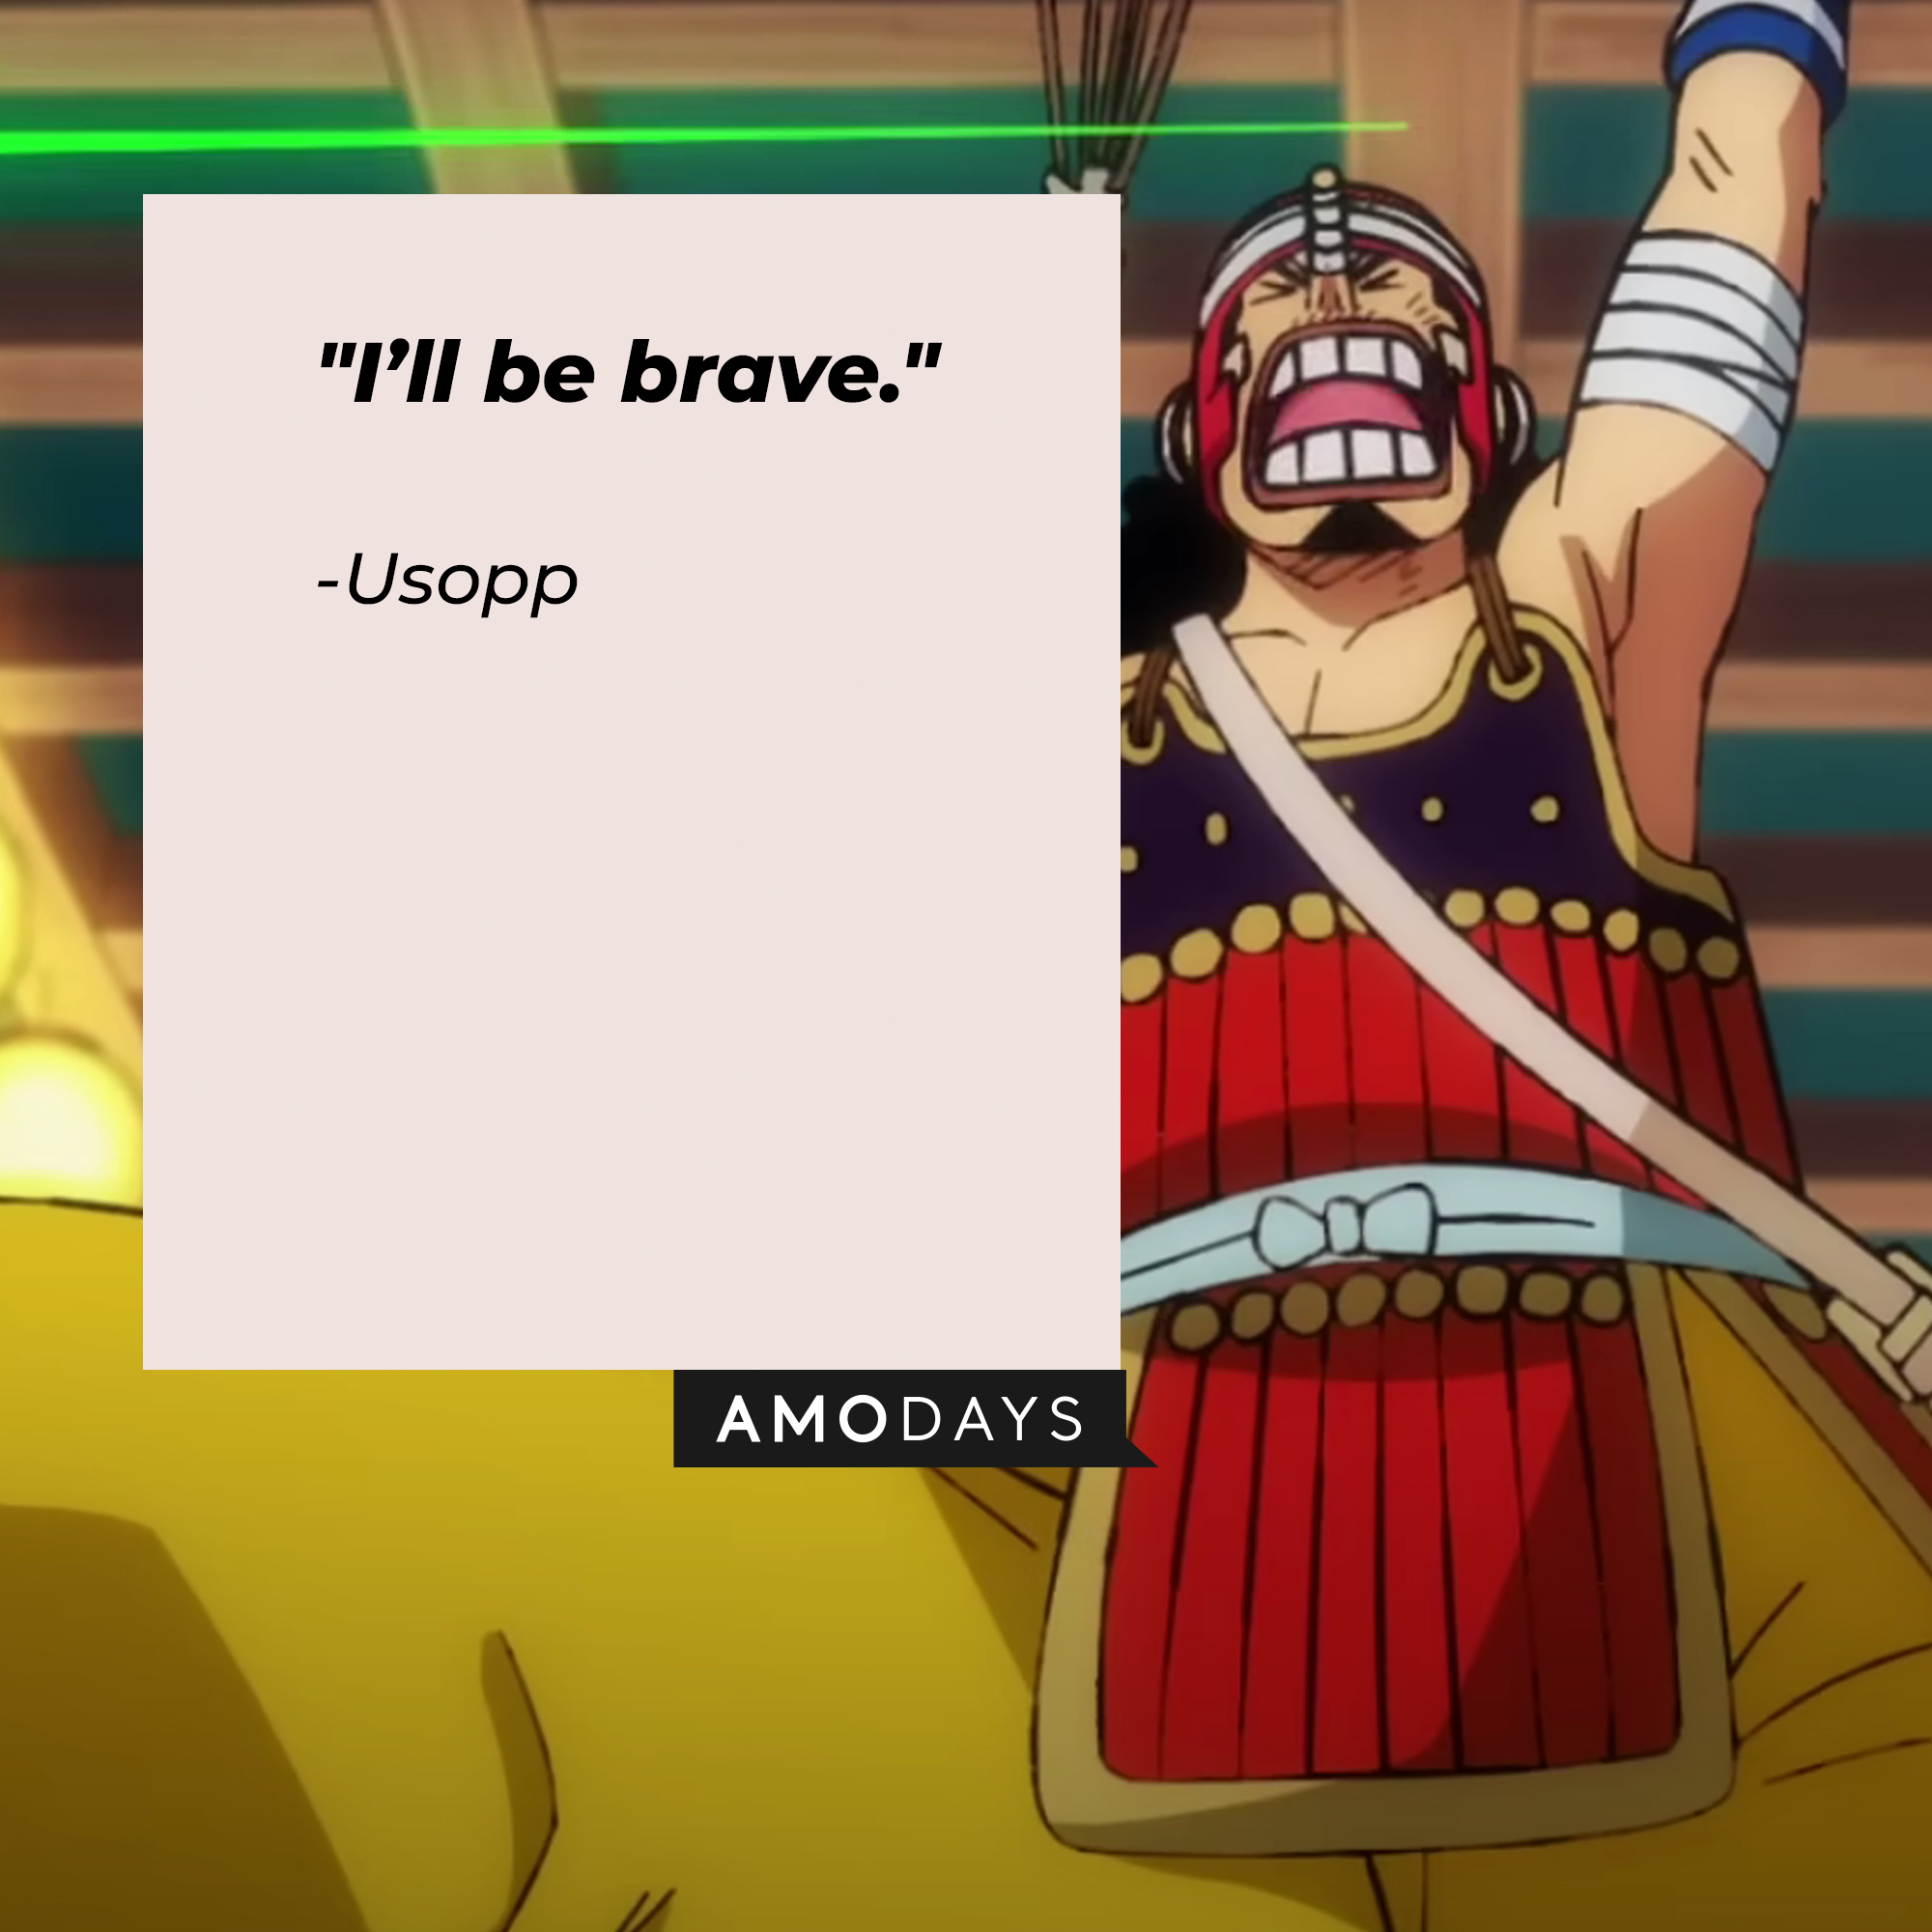 Usopp, with his quote: “I’ll be brave.” | Source: facebook.com/onepieceofficial